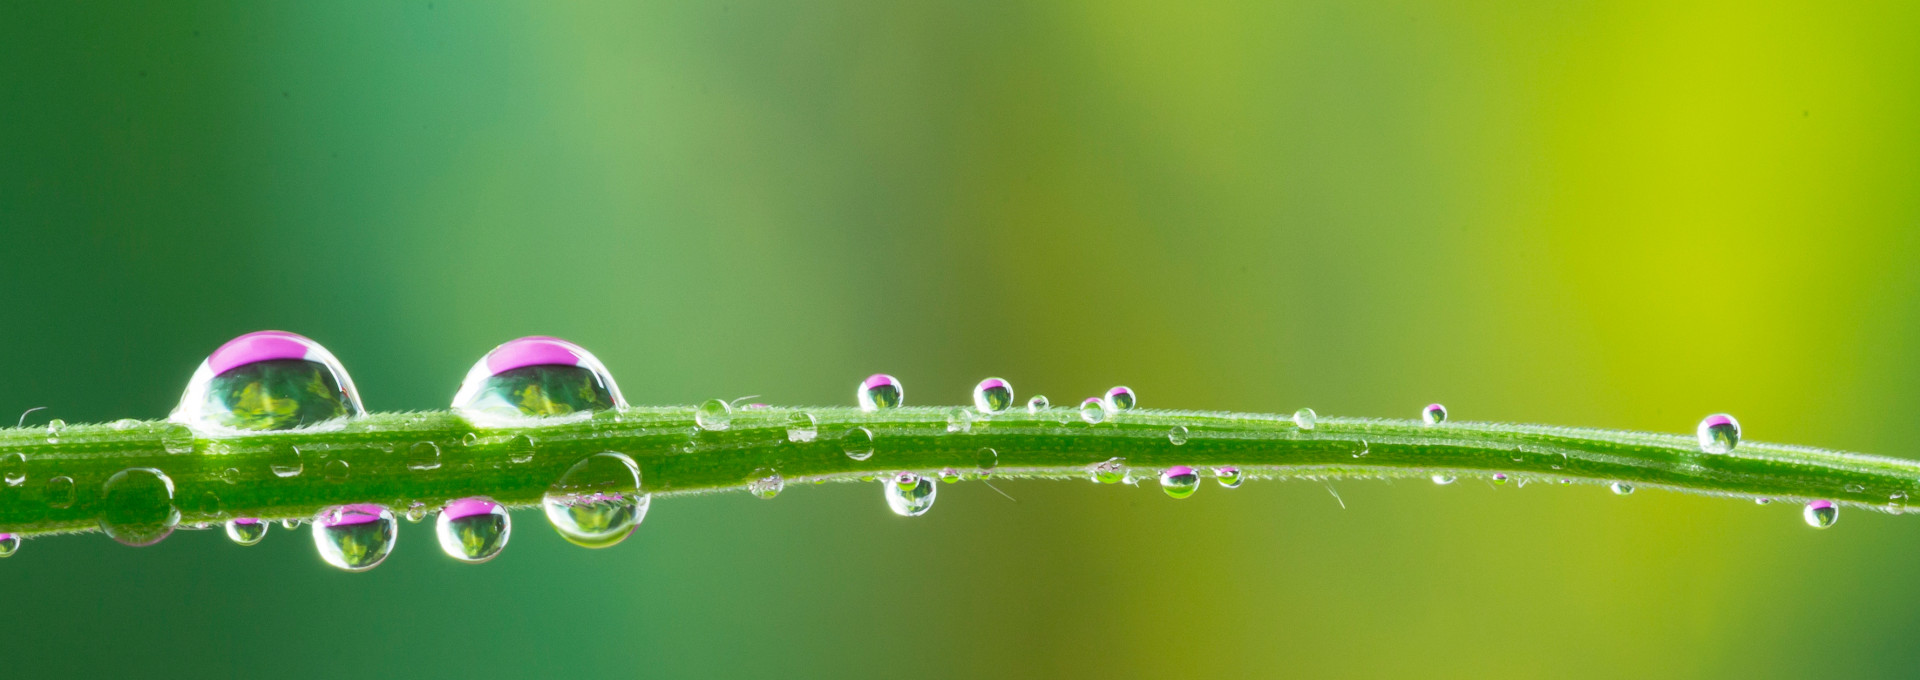 Drops of water on a leaf of gras